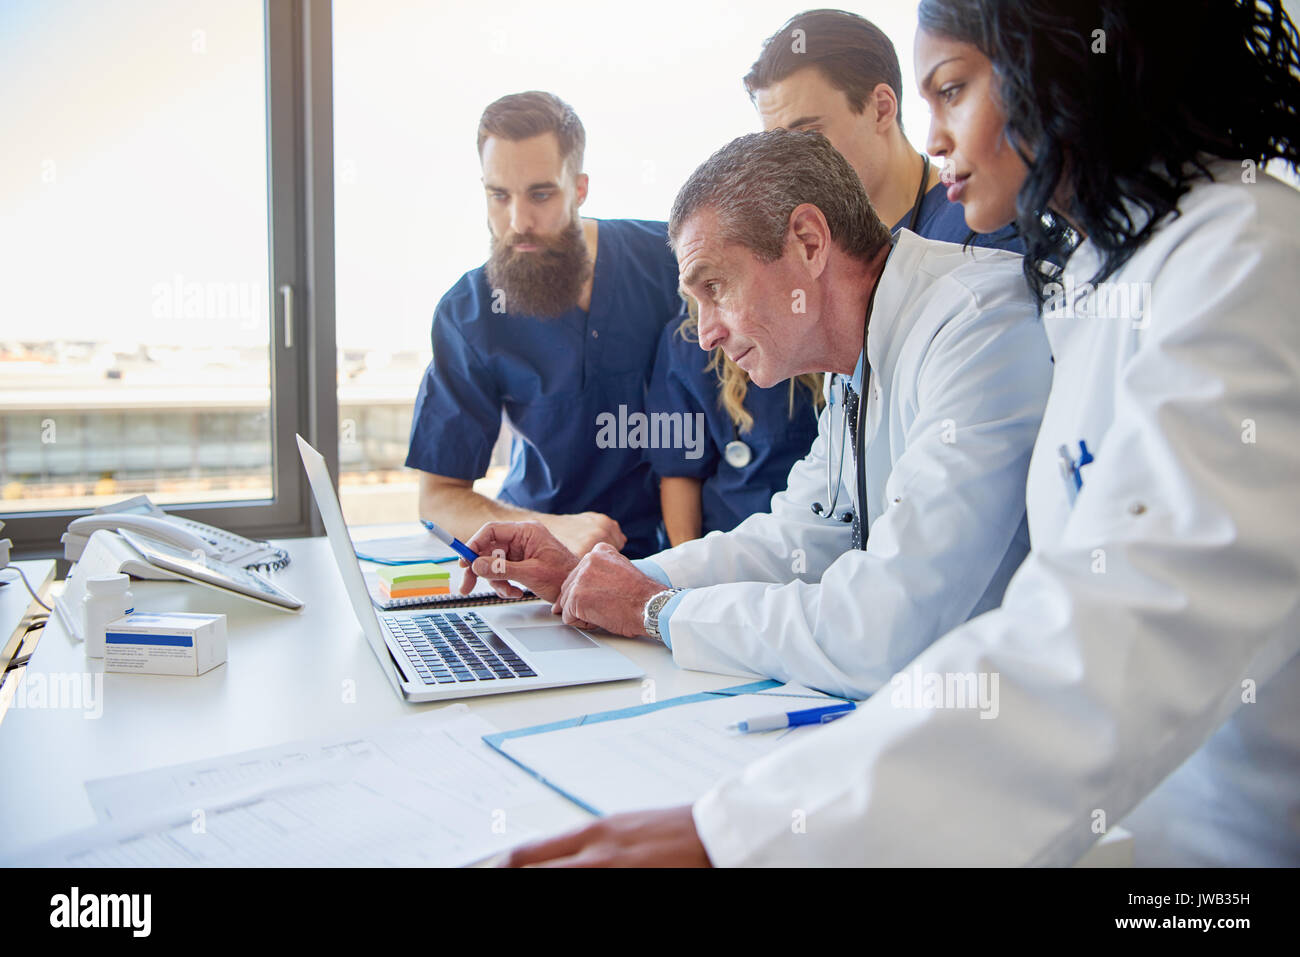 Team of doctors at a meeting in a hospital looking at a laptop Stock Photo